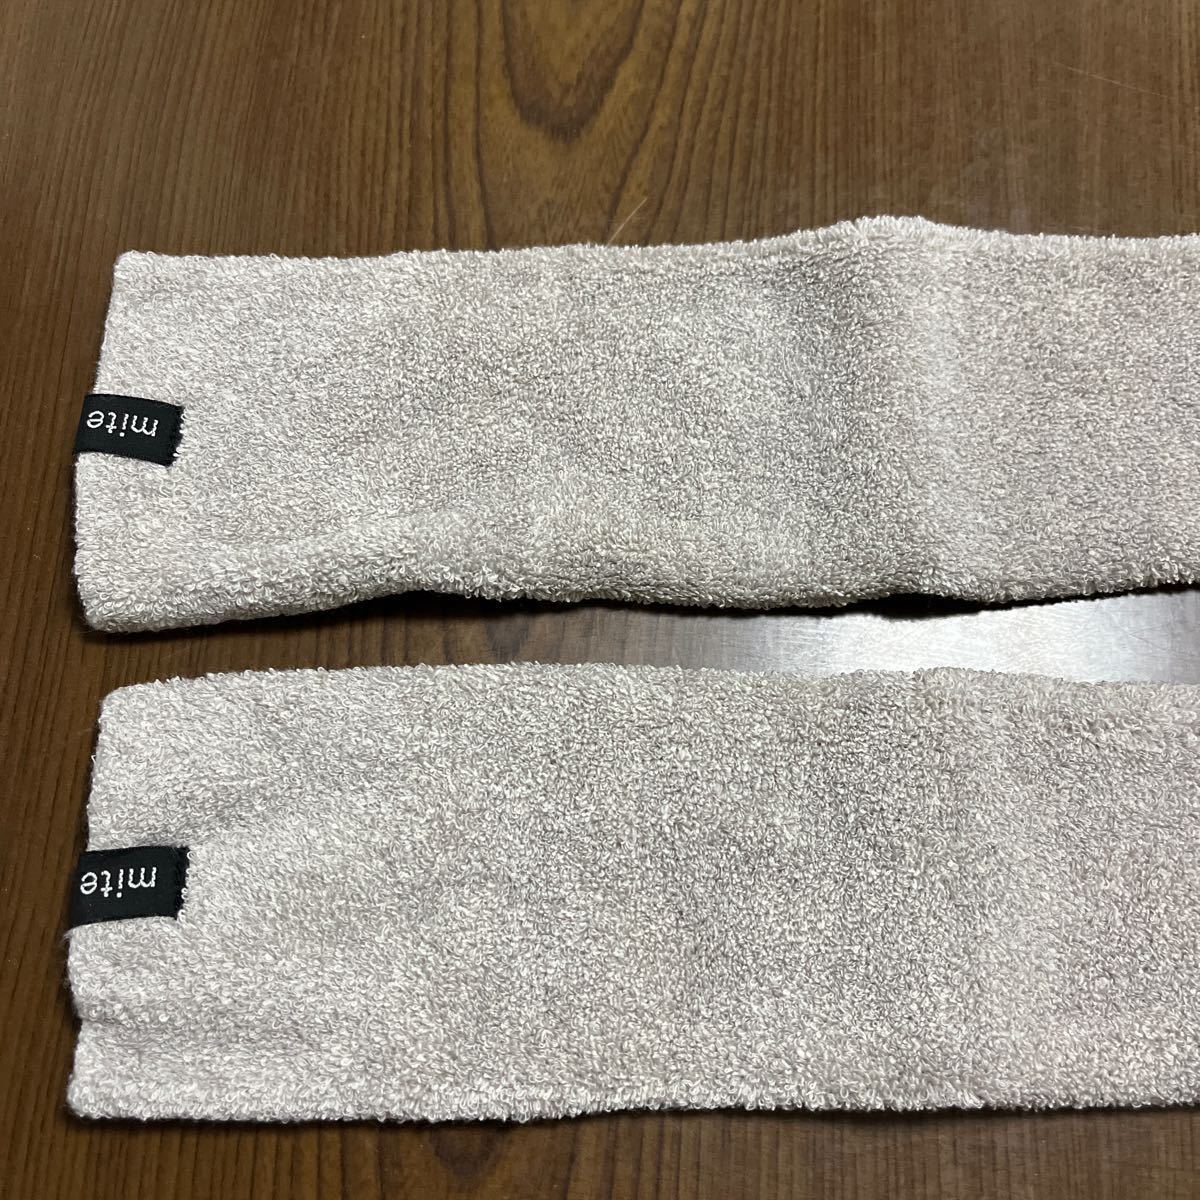 602p1937* [mi-te] mite leg warmers men's lady's made in Japan for summer winter tighten attaching not gap not ... is . for protection against cold cold-protection 